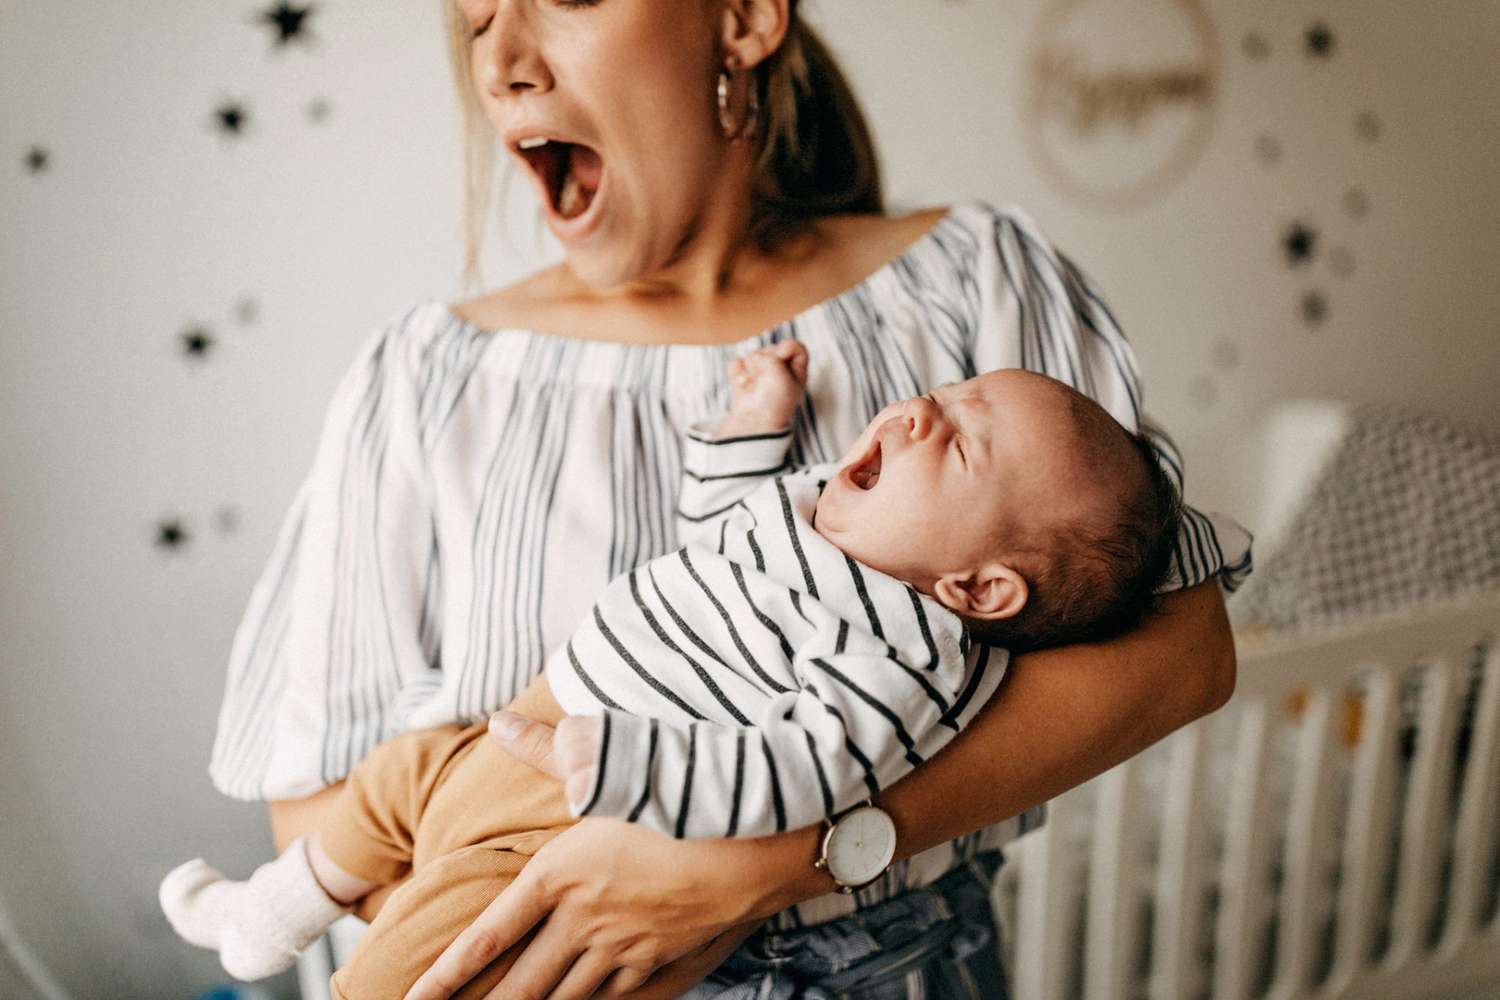 An image of a tired mother holding her baby.